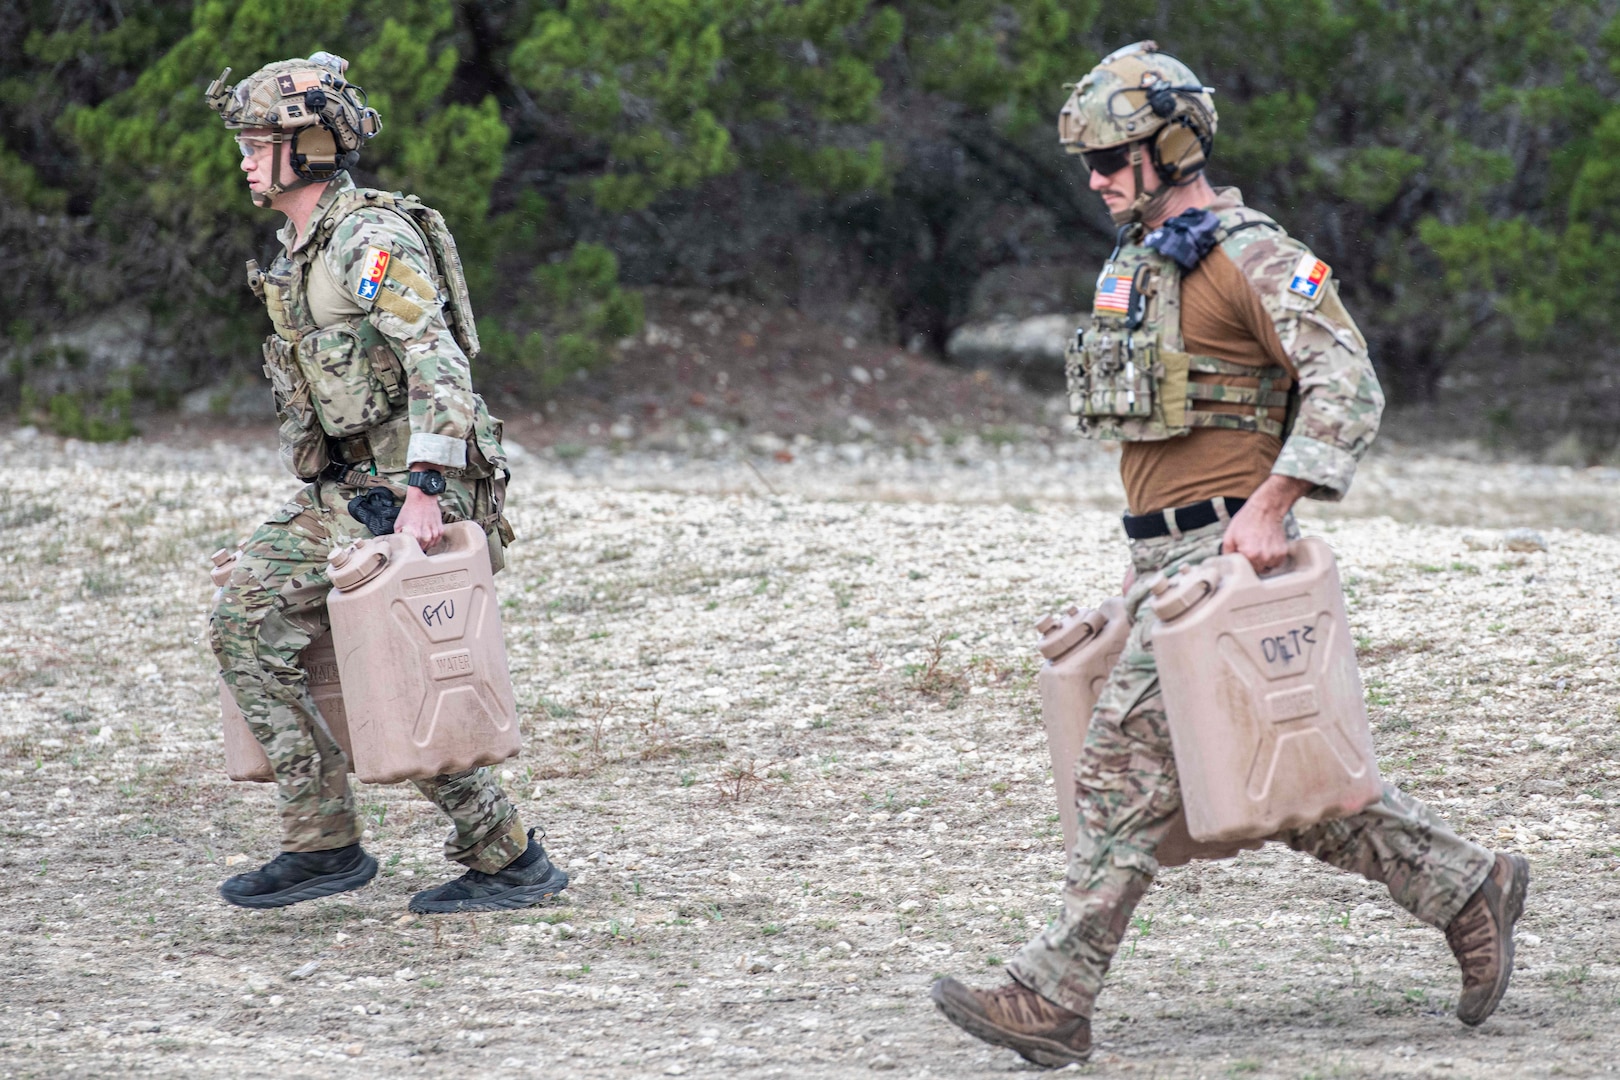 Two U.S. Air Force Tactical Air Control Party (TACP) specialist carry water canisters during the marksmanship portion of the TACP Lightning Challenge 2022, at Joint Base San Antonio-Camp Bullis, Texas, Nov. 4, 2022. Lightning Challenge tests United States Air Force TACP Airmen through competition in agile combat employment, physical ability and marksmanship in order to identify the most outstanding multi-capable Airman in the world, prepared to fight and win on the all-domain battlefields of the future. (U.S. Air Force photo by Tristin English